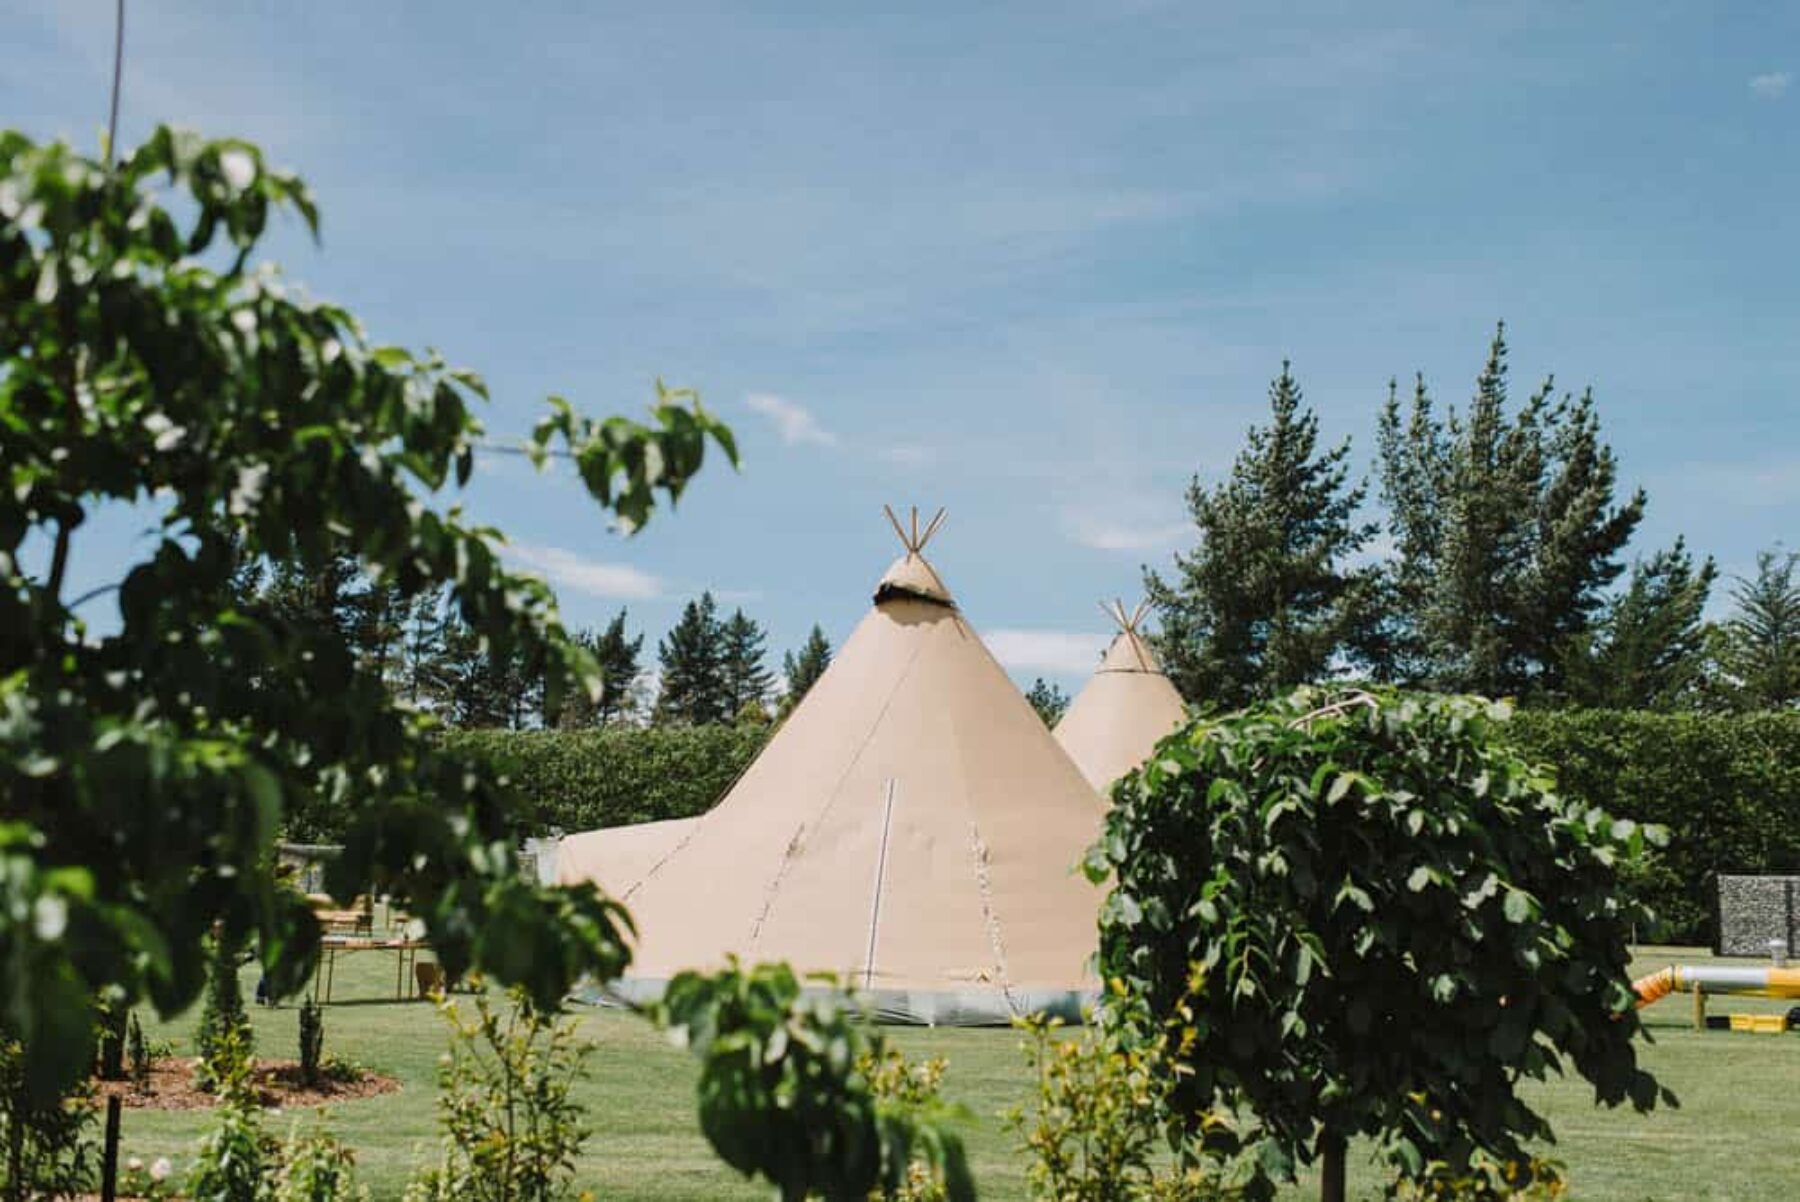 Boho tipi wedding on an olive farm in Christchurch NZ - photography by Paul Tatterson